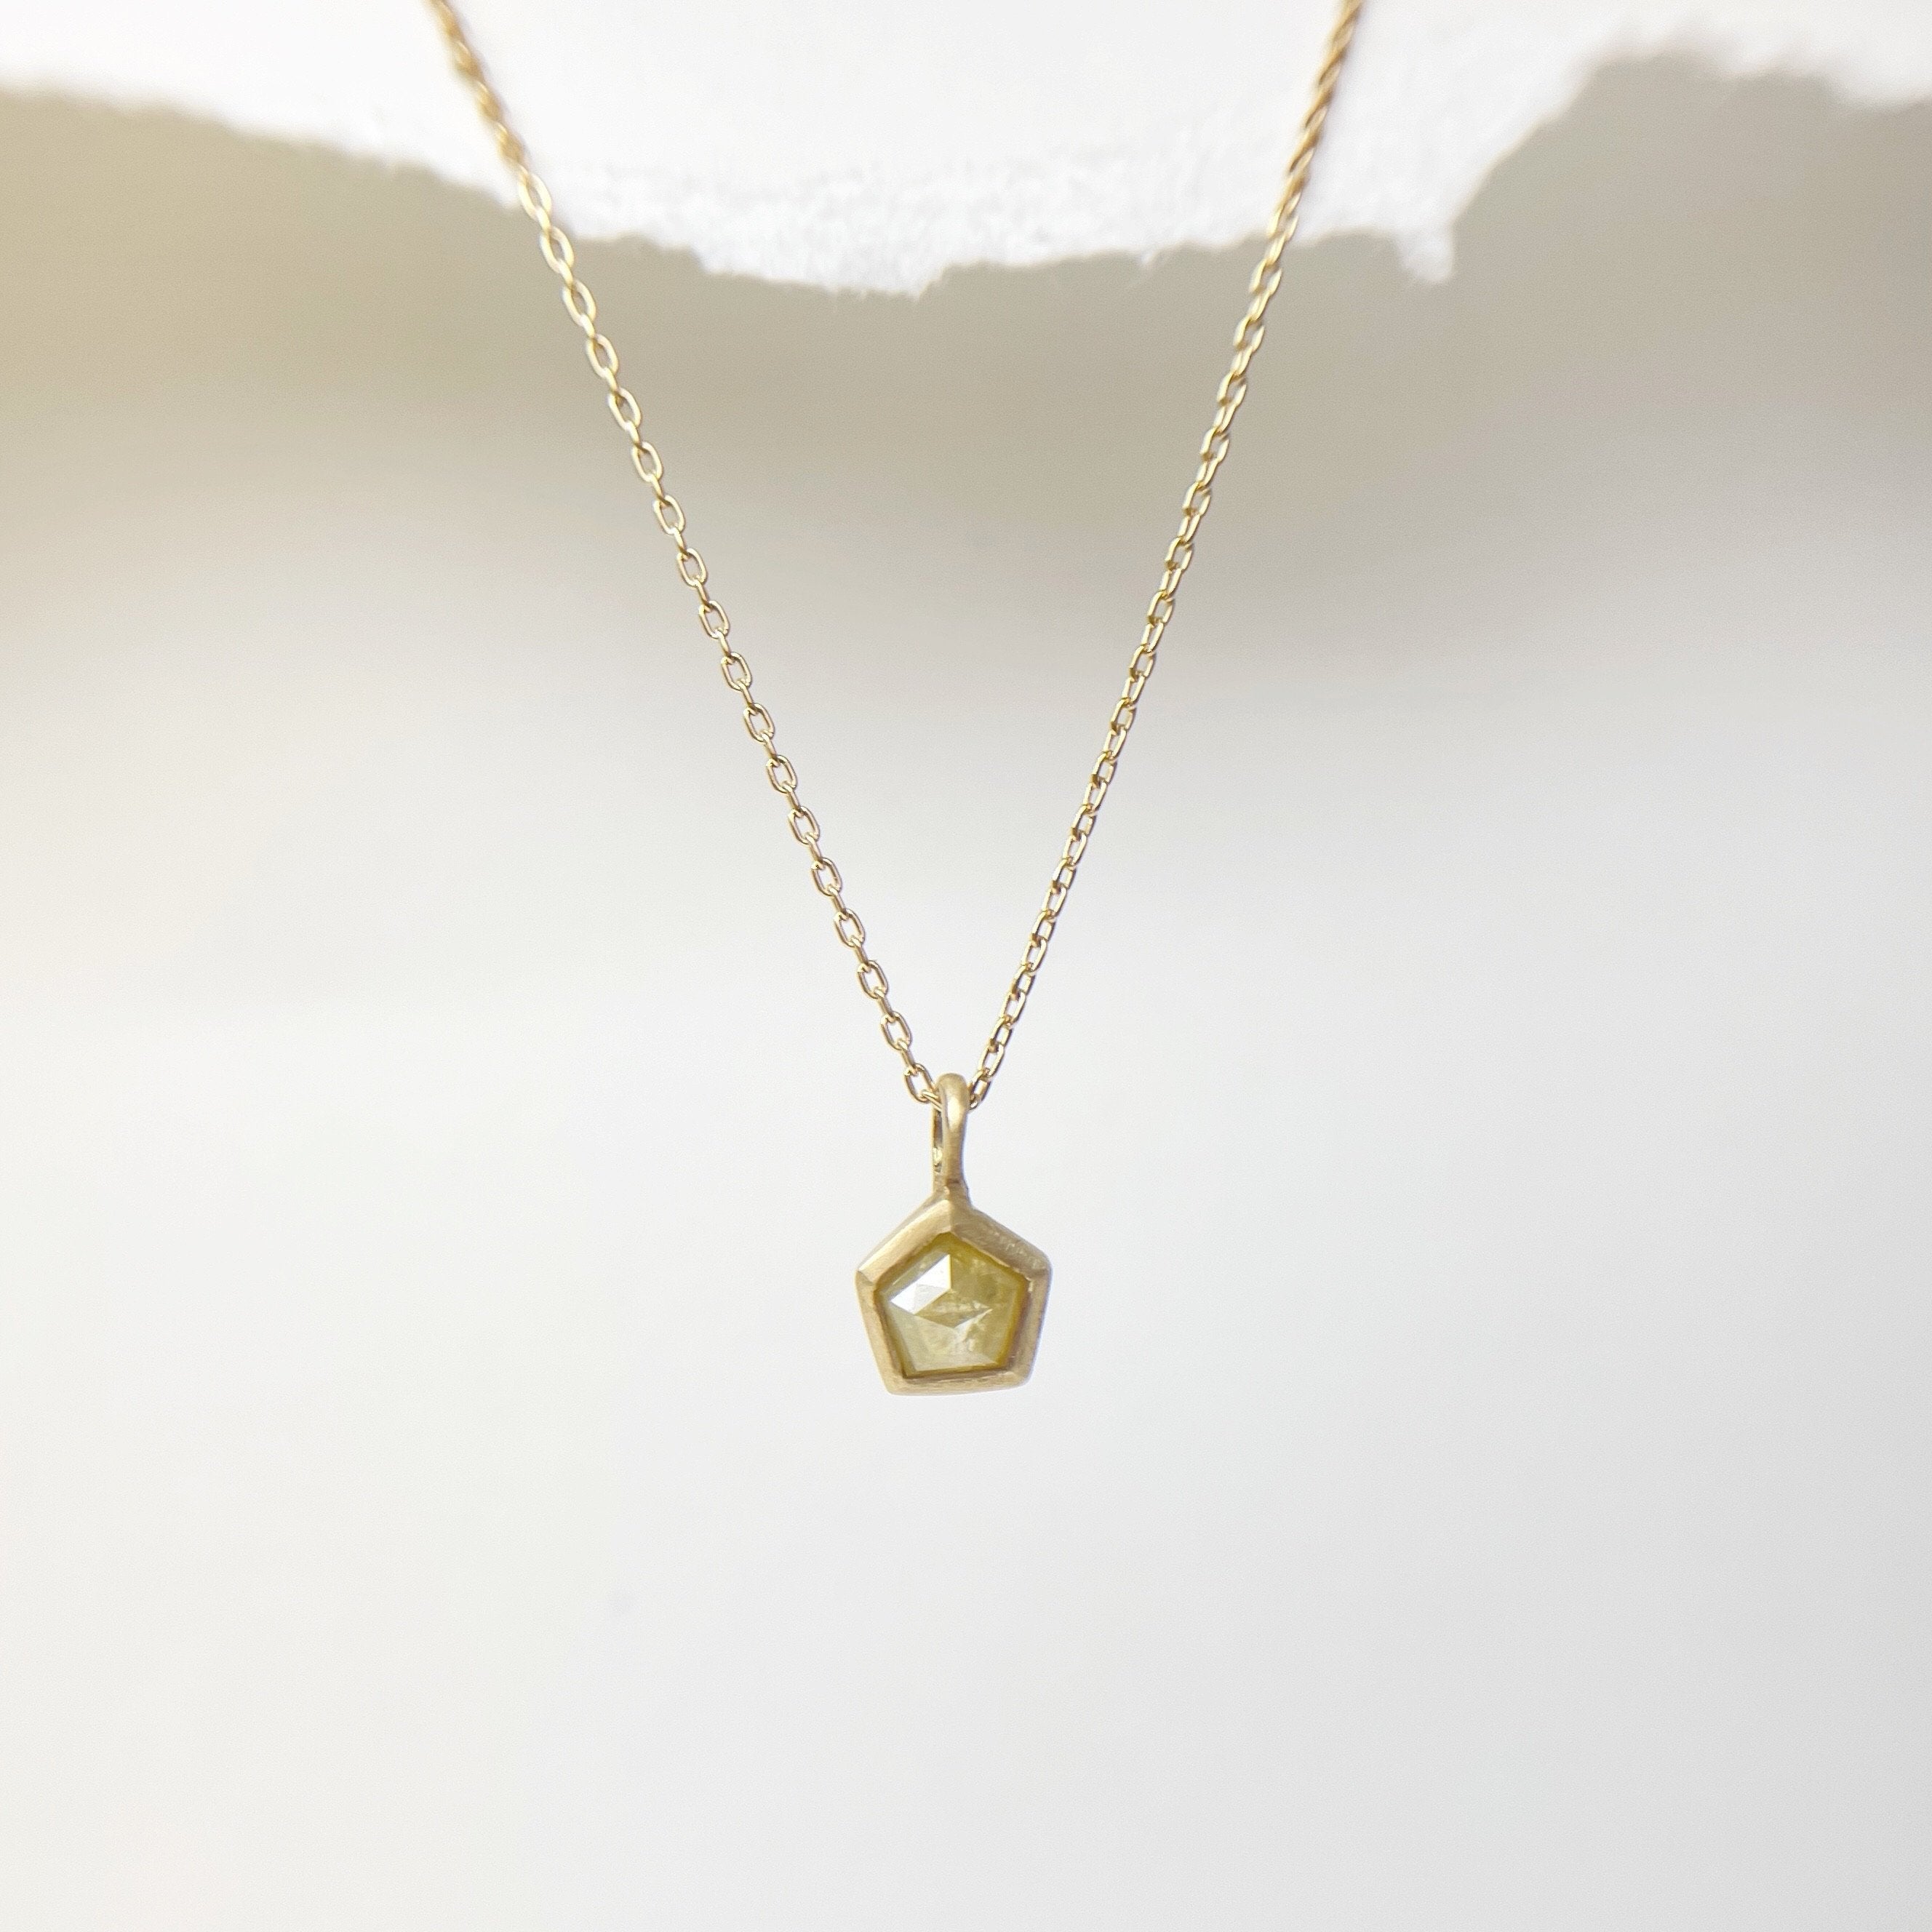 Yellow Star Shaped Rustic Diamond Necklace